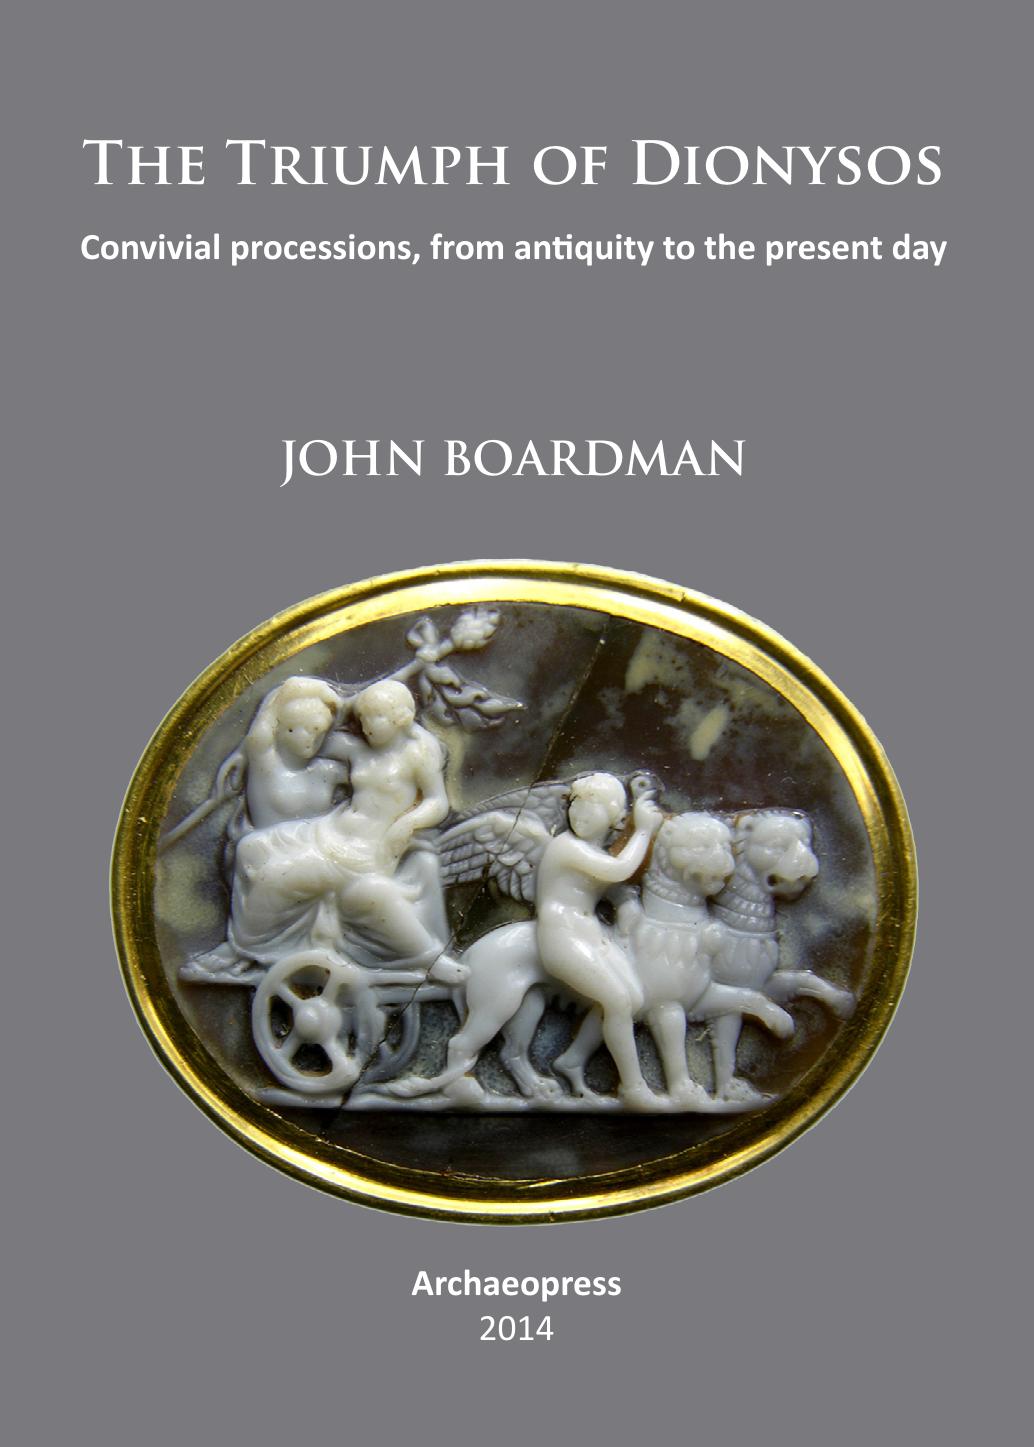 The Triumph of Dionysos: Convivial Processions, from Antiquity to the Present Day by John Boardman